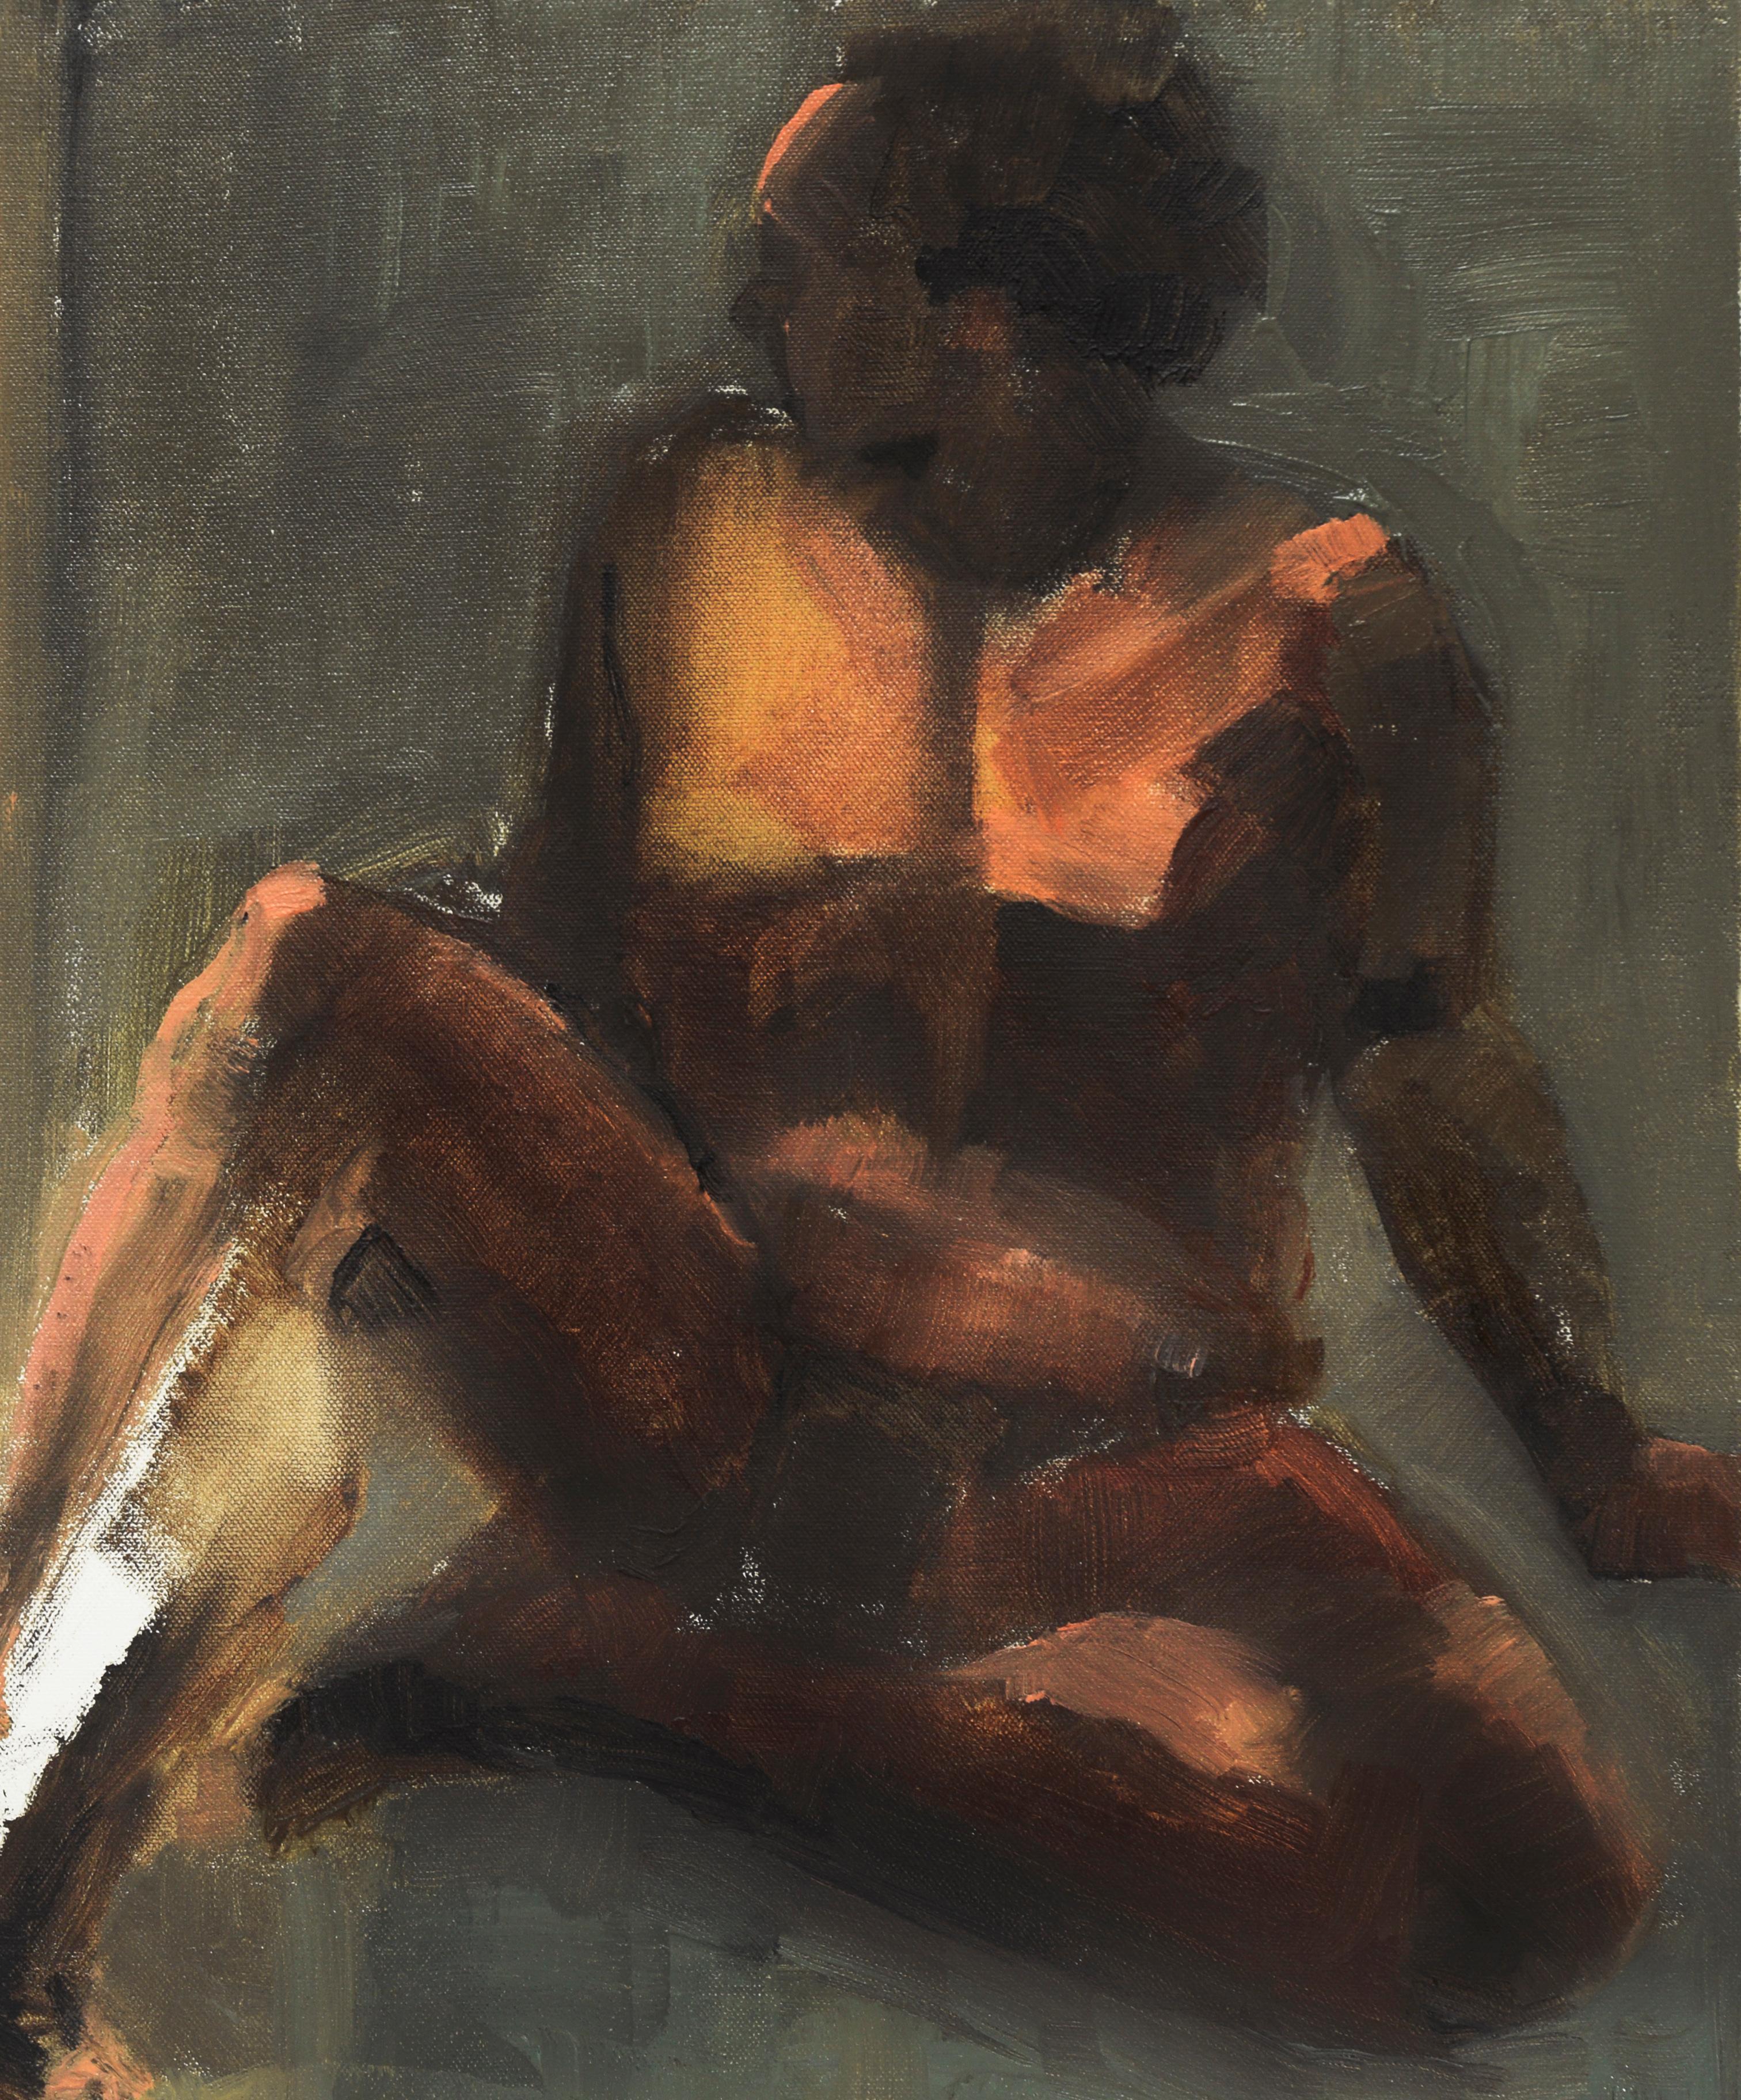 Bay Area Figurative Nude Study - Oil On Canvas - Abstract Expressionist Painting by Sumrall